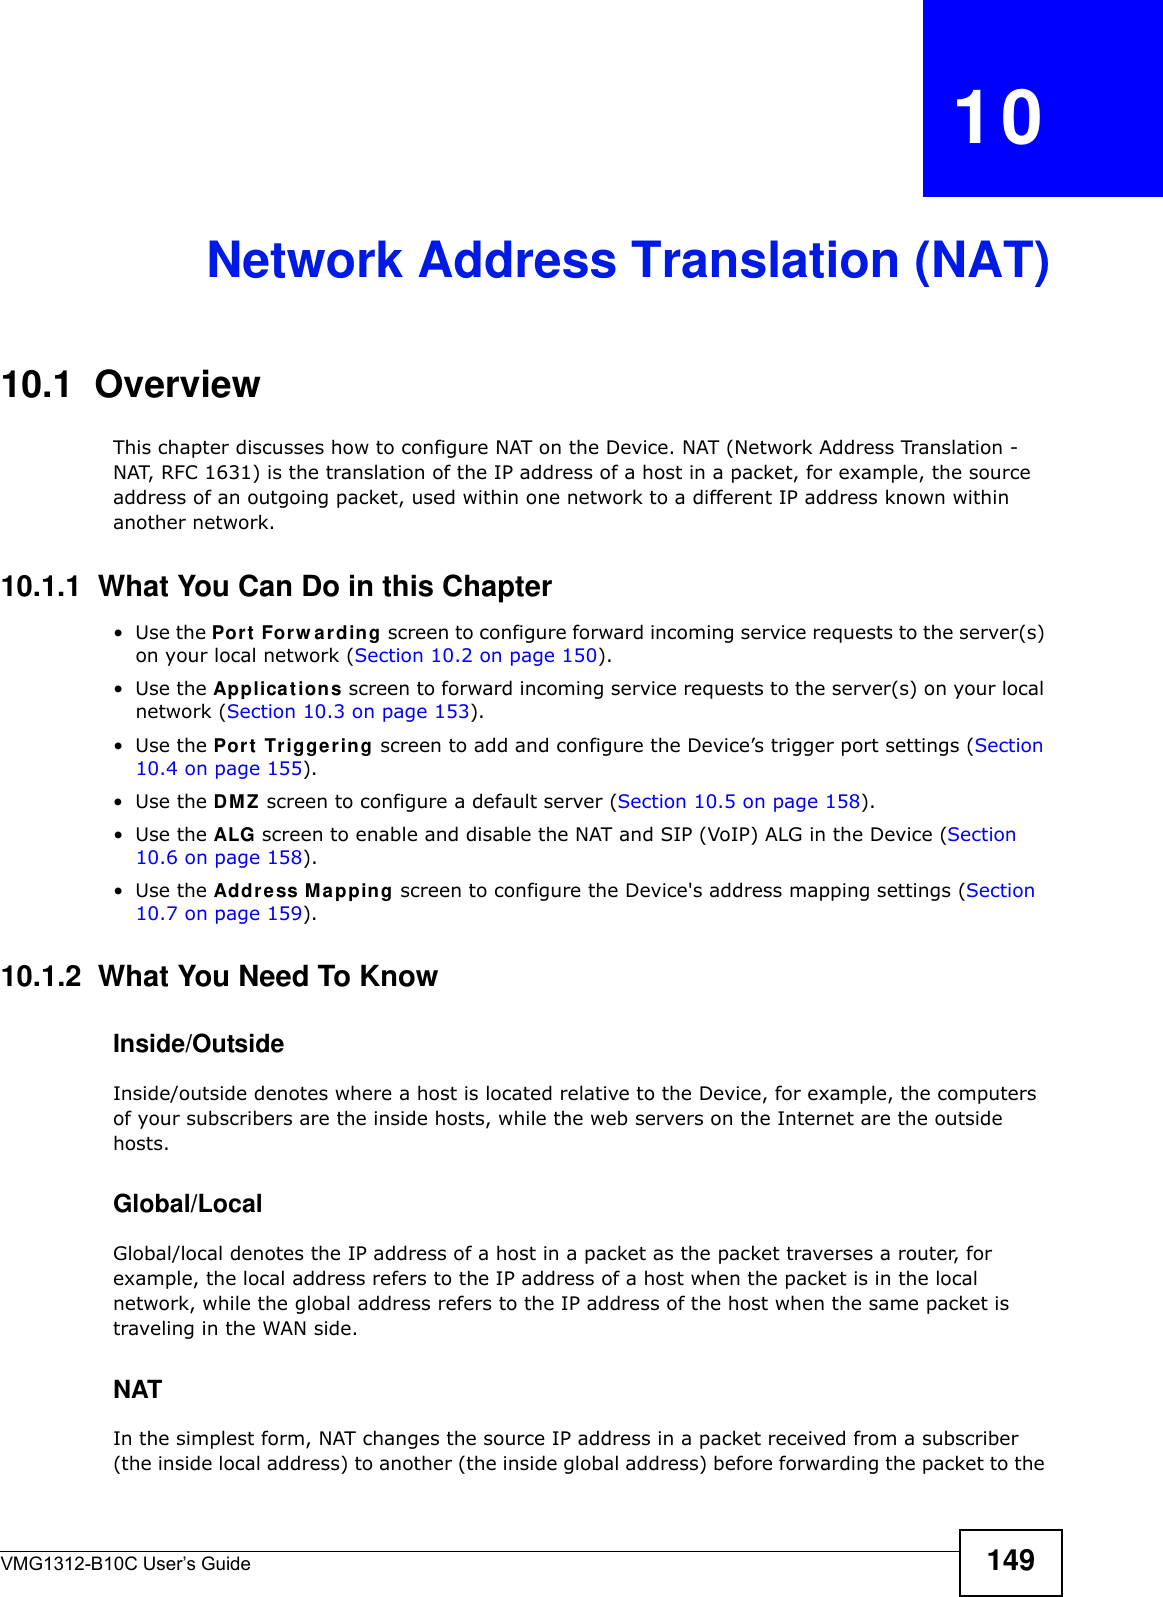 VMG1312-B10C User’s Guide 149CHAPTER   10Network Address Translation (NAT)10.1  OverviewThis chapter discusses how to configure NAT on the Device. NAT (Network Address Translation - NAT, RFC 1631) is the translation of the IP address of a host in a packet, for example, the source address of an outgoing packet, used within one network to a different IP address known within another network.10.1.1  What You Can Do in this Chapter•Use the Por t  For w ar din g screen to configure forward incoming service requests to the server(s) on your local network (Section 10.2 on page 150). •Use the App lica t ion s screen to forward incoming service requests to the server(s) on your local network (Section 10.3 on page 153).•Use the Port  Tr igge rin g screen to add and configure the Device’s trigger port settings (Section 10.4 on page 155).•Use the DM Z screen to configure a default server (Section 10.5 on page 158).•Use the ALG screen to enable and disable the NAT and SIP (VoIP) ALG in the Device (Section 10.6 on page 158).•Use the Addr ess M a pping screen to configure the Device&apos;s address mapping settings (Section 10.7 on page 159). 10.1.2  What You Need To KnowInside/OutsideInside/outside denotes where a host is located relative to the Device, for example, the computers of your subscribers are the inside hosts, while the web servers on the Internet are the outside hosts. Global/LocalGlobal/local denotes the IP address of a host in a packet as the packet traverses a router, for example, the local address refers to the IP address of a host when the packet is in the local network, while the global address refers to the IP address of the host when the same packet is traveling in the WAN side. NATIn the simplest form, NAT changes the source IP address in a packet received from a subscriber (the inside local address) to another (the inside global address) before forwarding the packet to the 